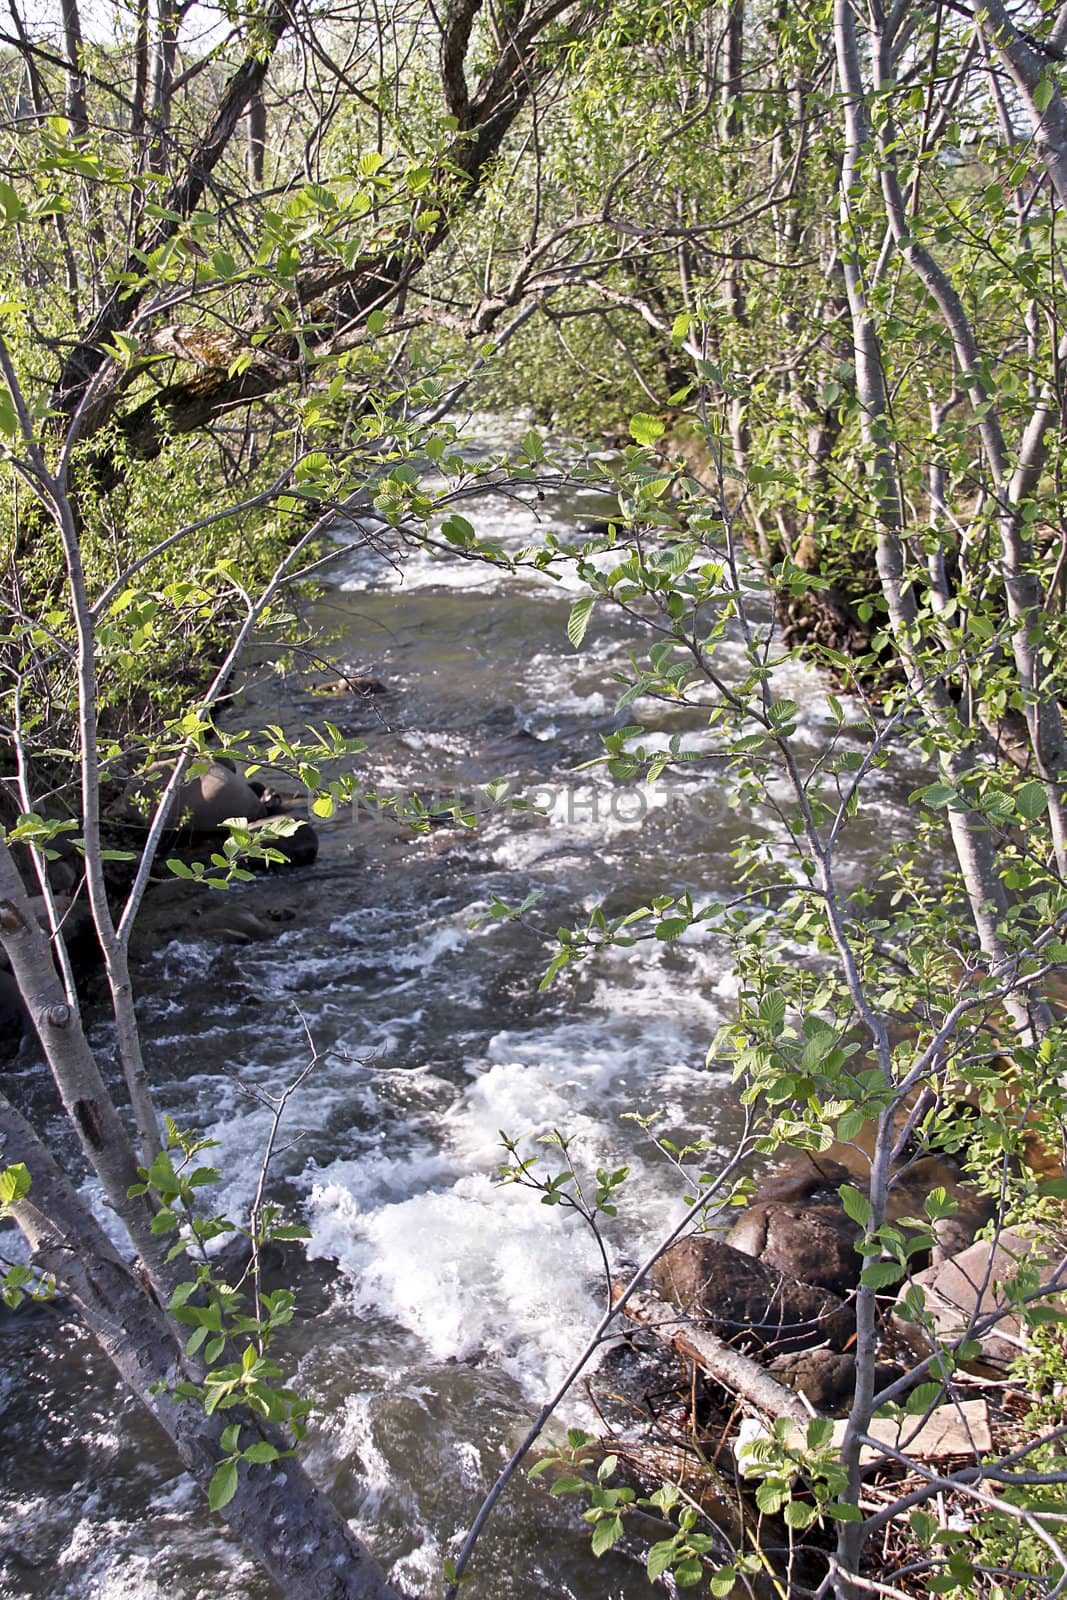 Closeup of a forest creek with trees